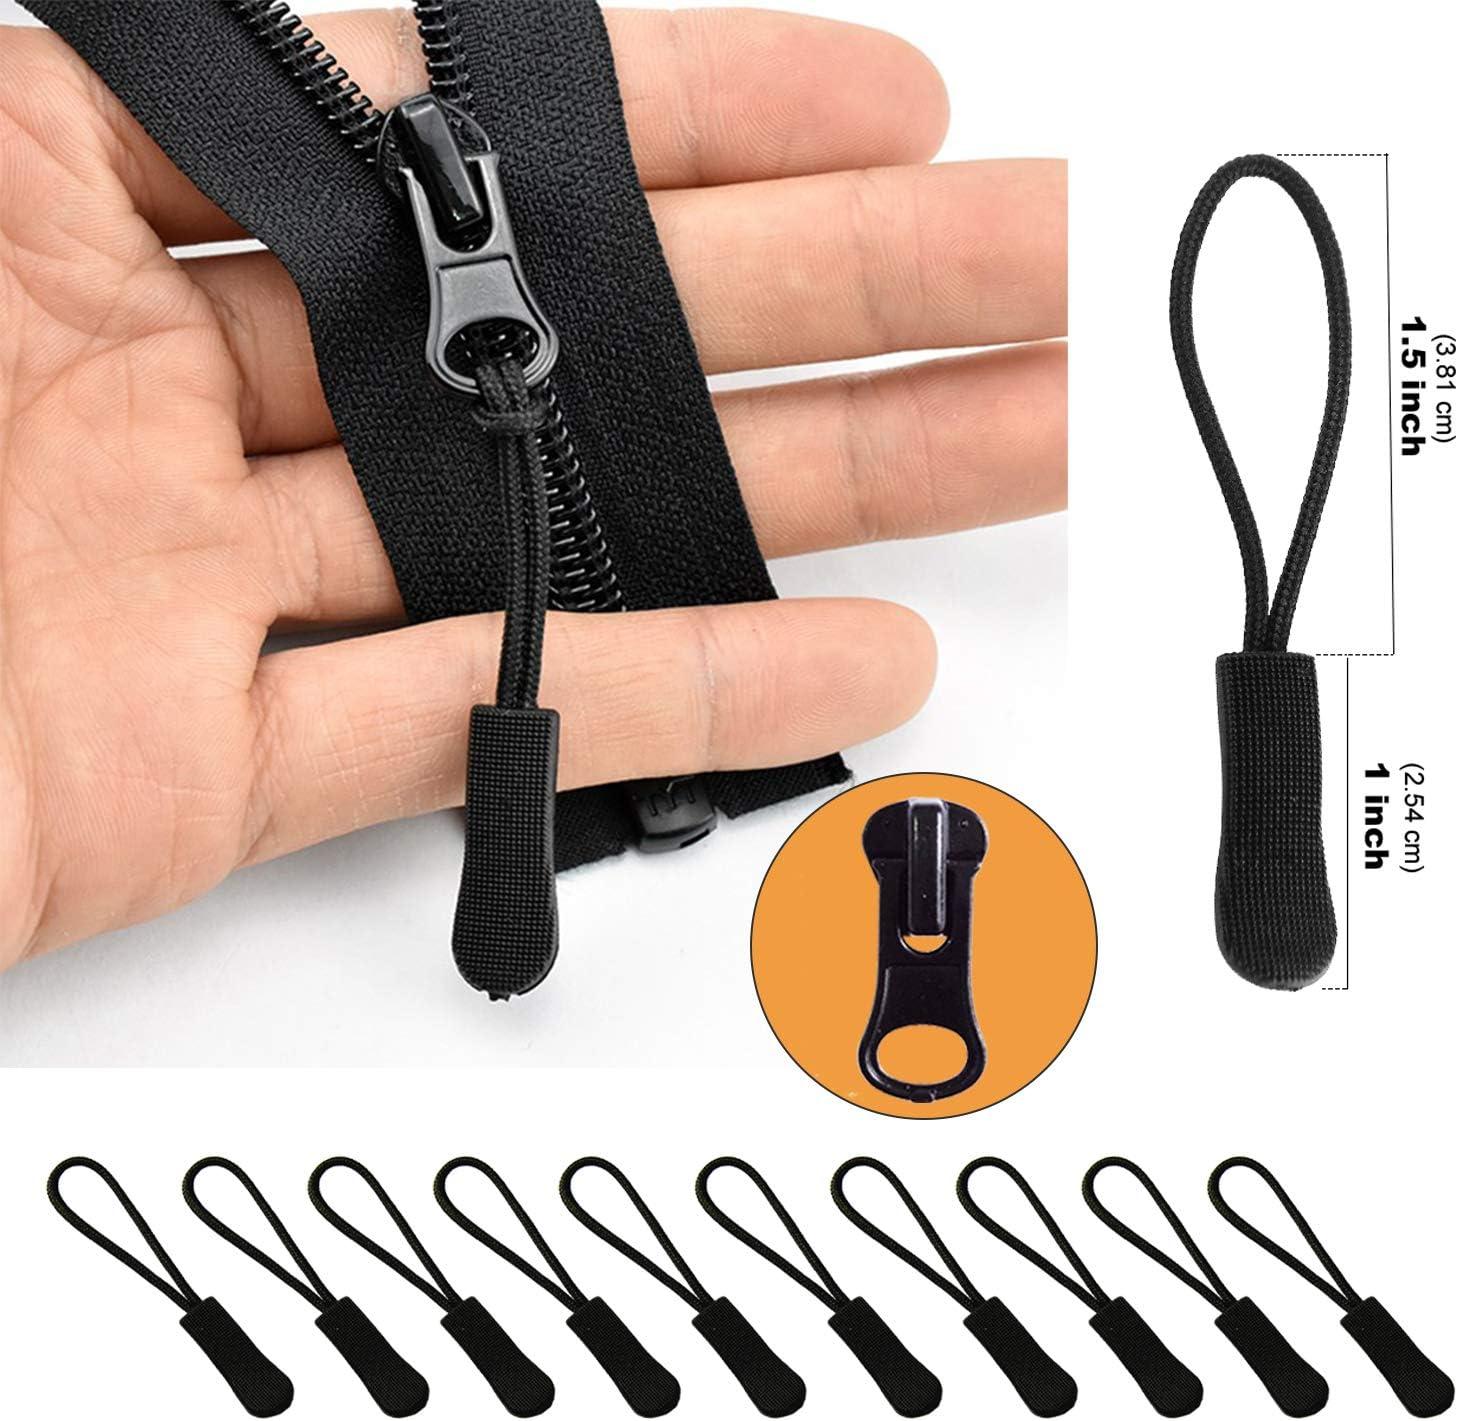 EuTengHao 169Pcs Zipper Repair Kit Zipper Replacement Zipper Pull Rescue Kit  with Zipper Install Pliers Tool and Zipper Extension Pulls for Clothing  Jackets Purses Luggage Backpacks (Silver and Black)